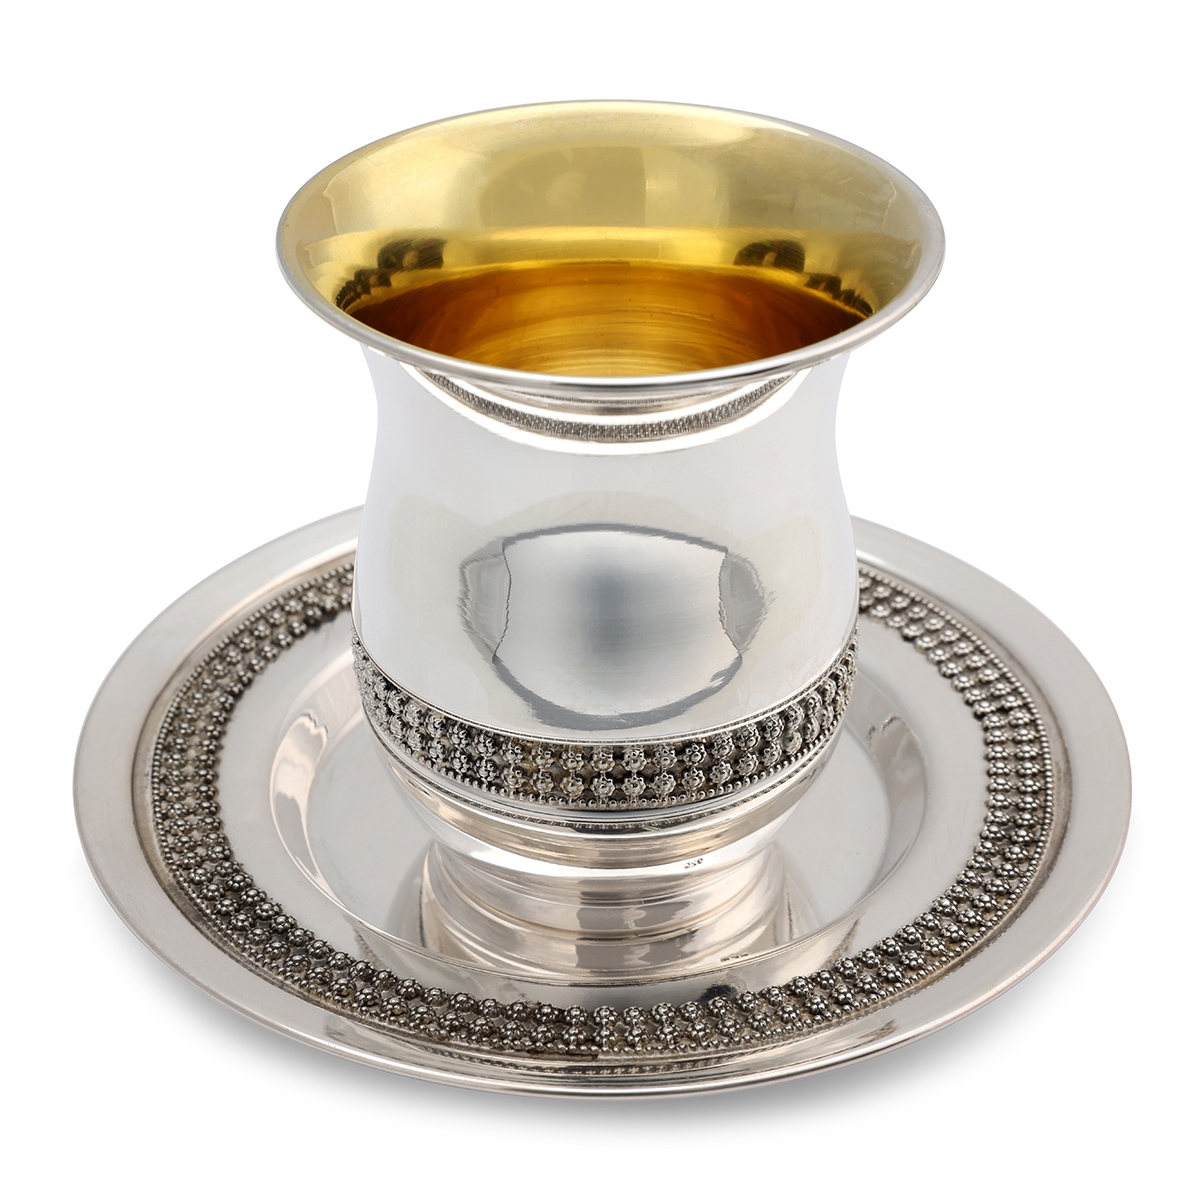 Handcrafted Sterling Silver Kiddush Cup With Refined Filigree Design By Traditional Yemenite Art - 1